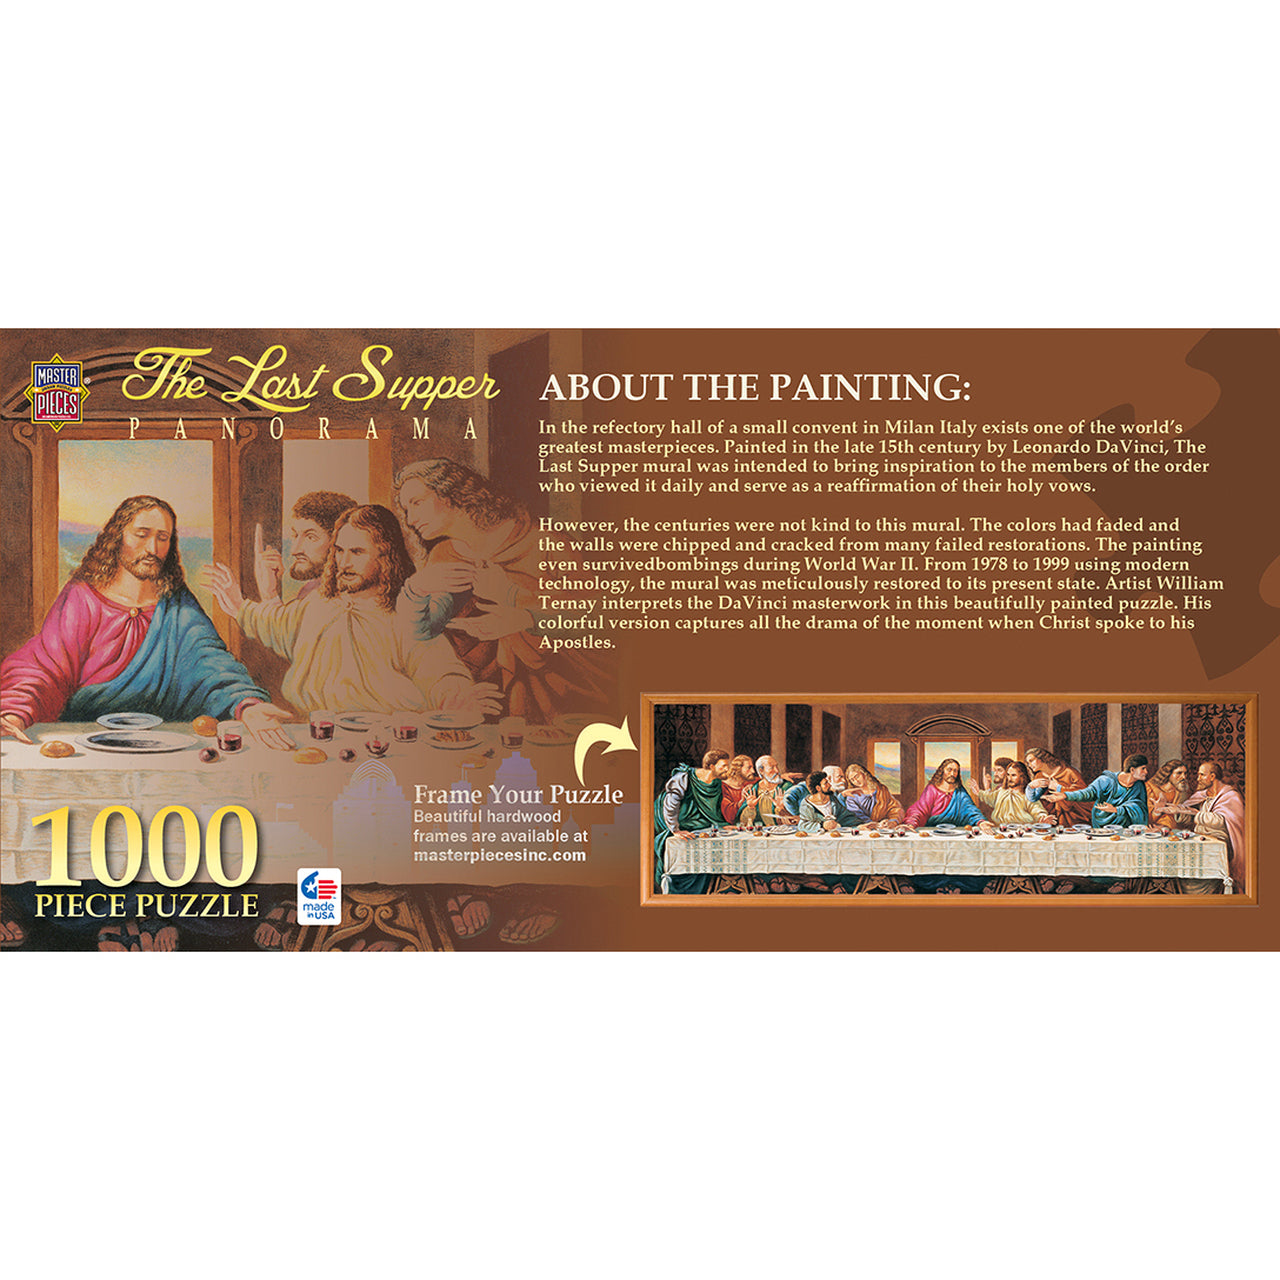 Inspirational The Last Supper 1000 Piece Panoramic Jigsaw Puzzle by Masterpieces